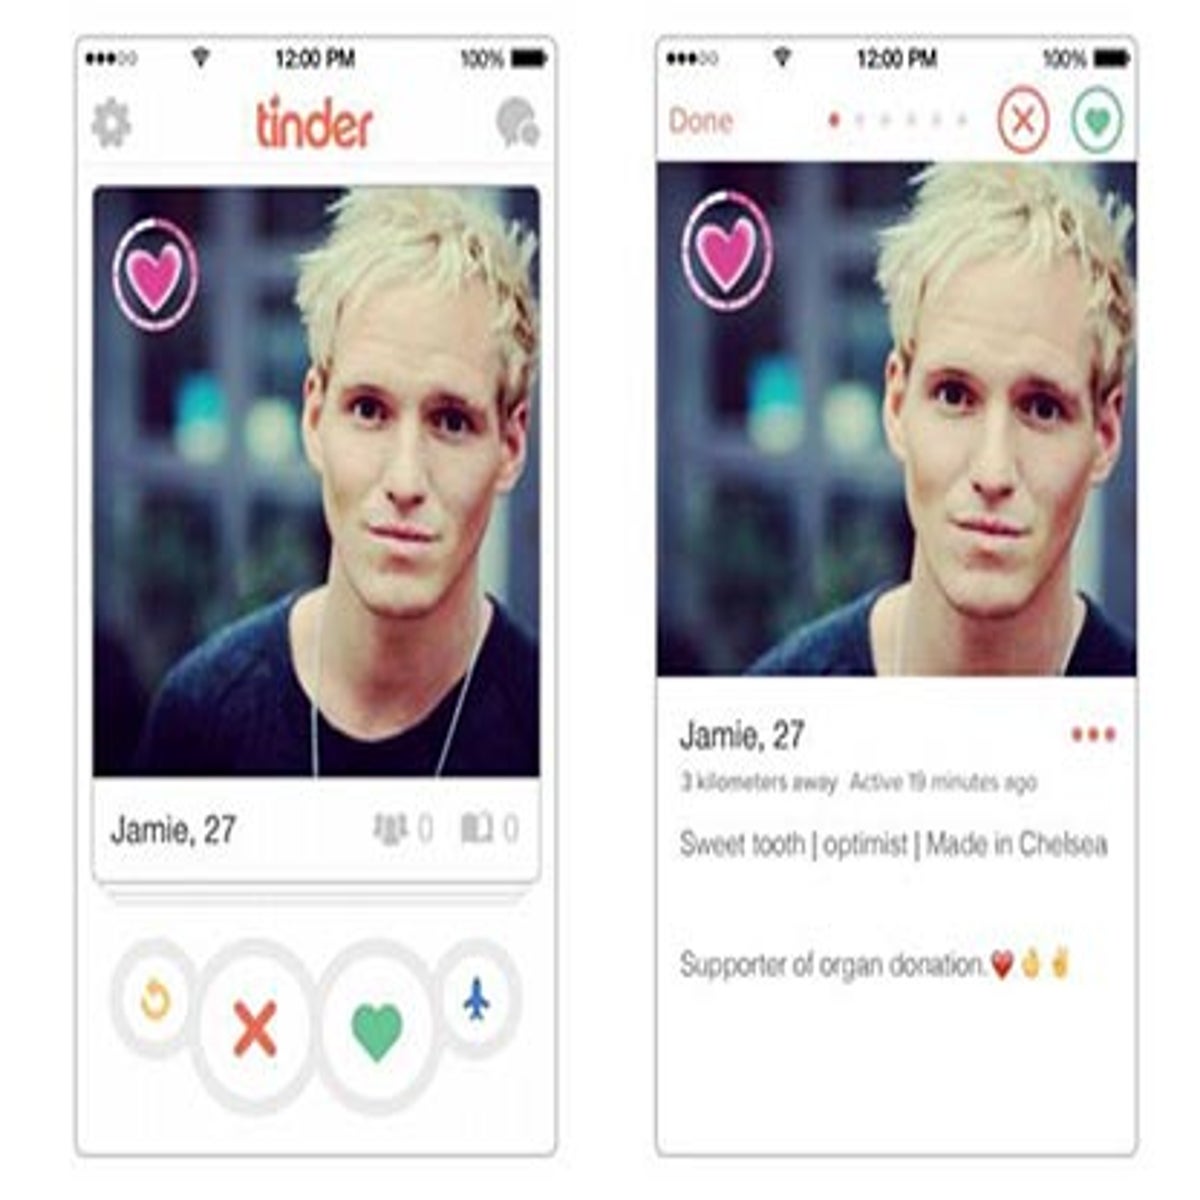 NHS hooks up with dating app Tinder on organ donations - BBC News